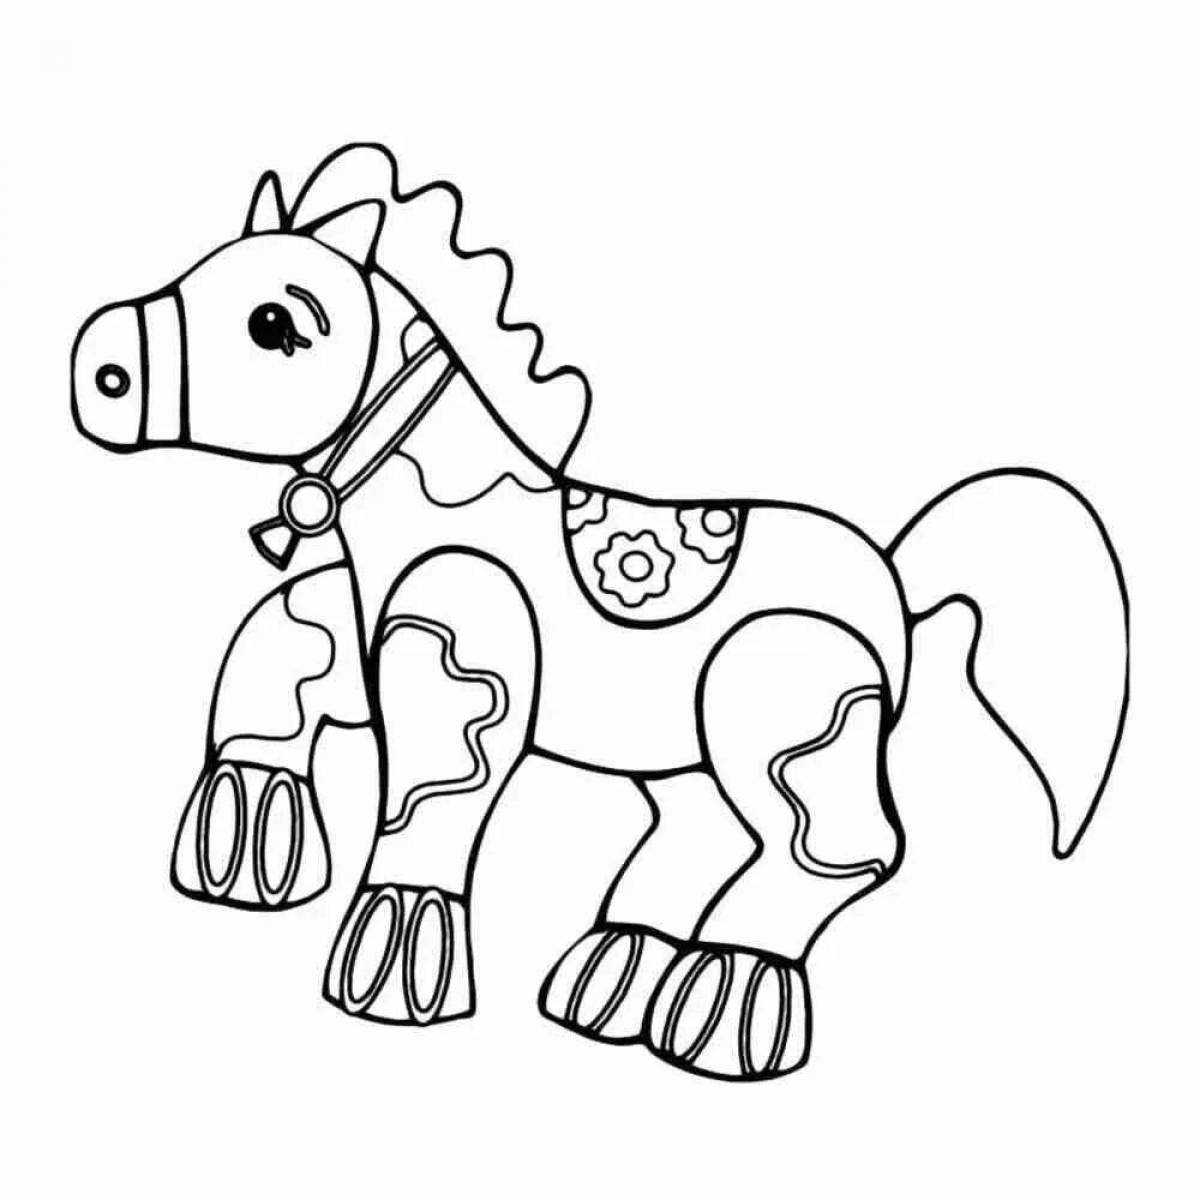 Exquisite horse coloring book for 4-5 year olds